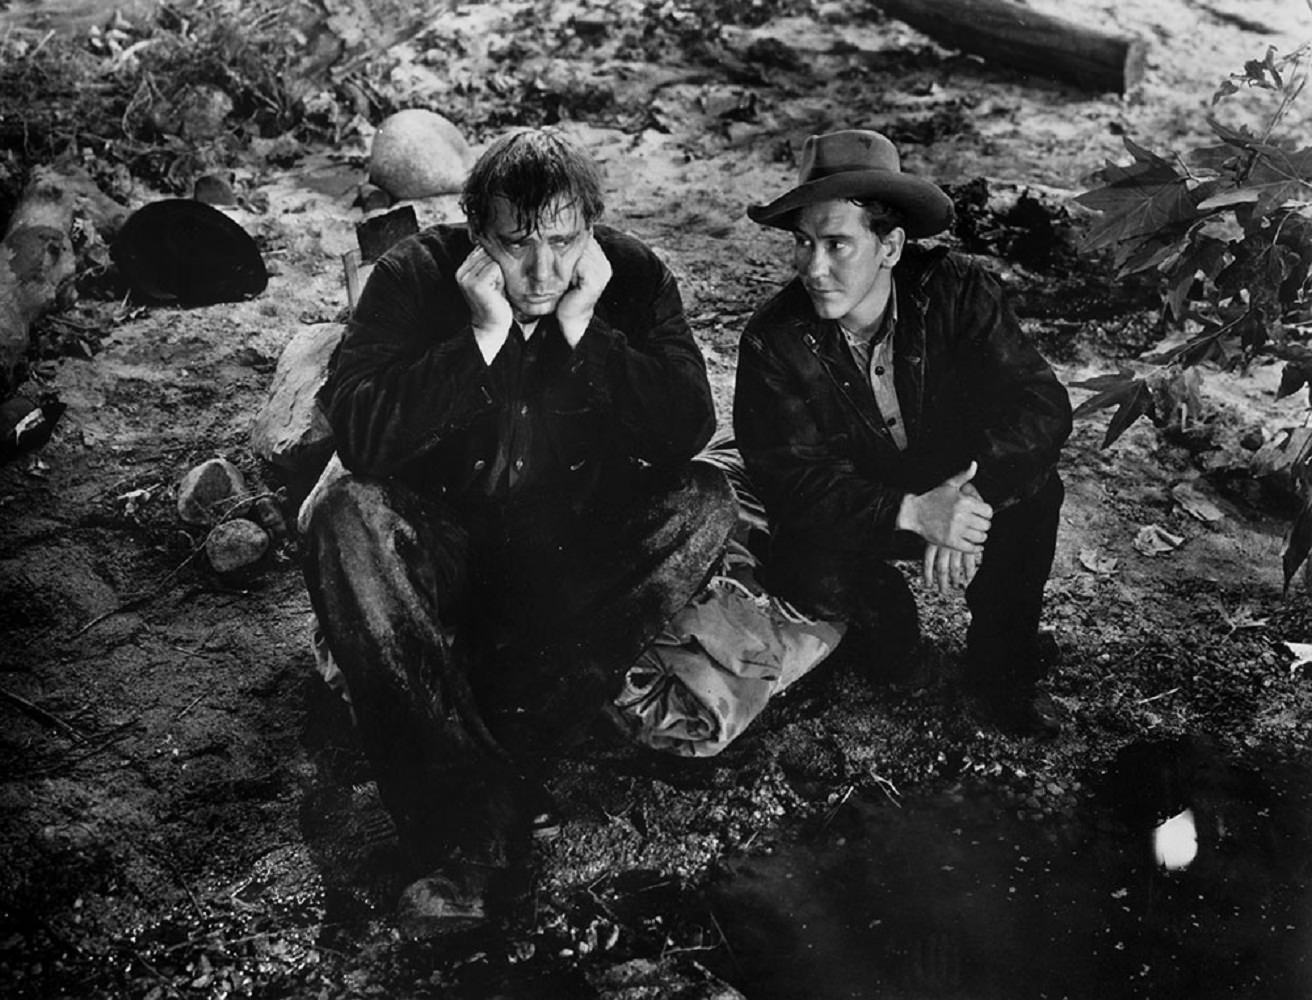 Lon Chaney, Jr. and Burgess Meredith in Of mice and men, 1933